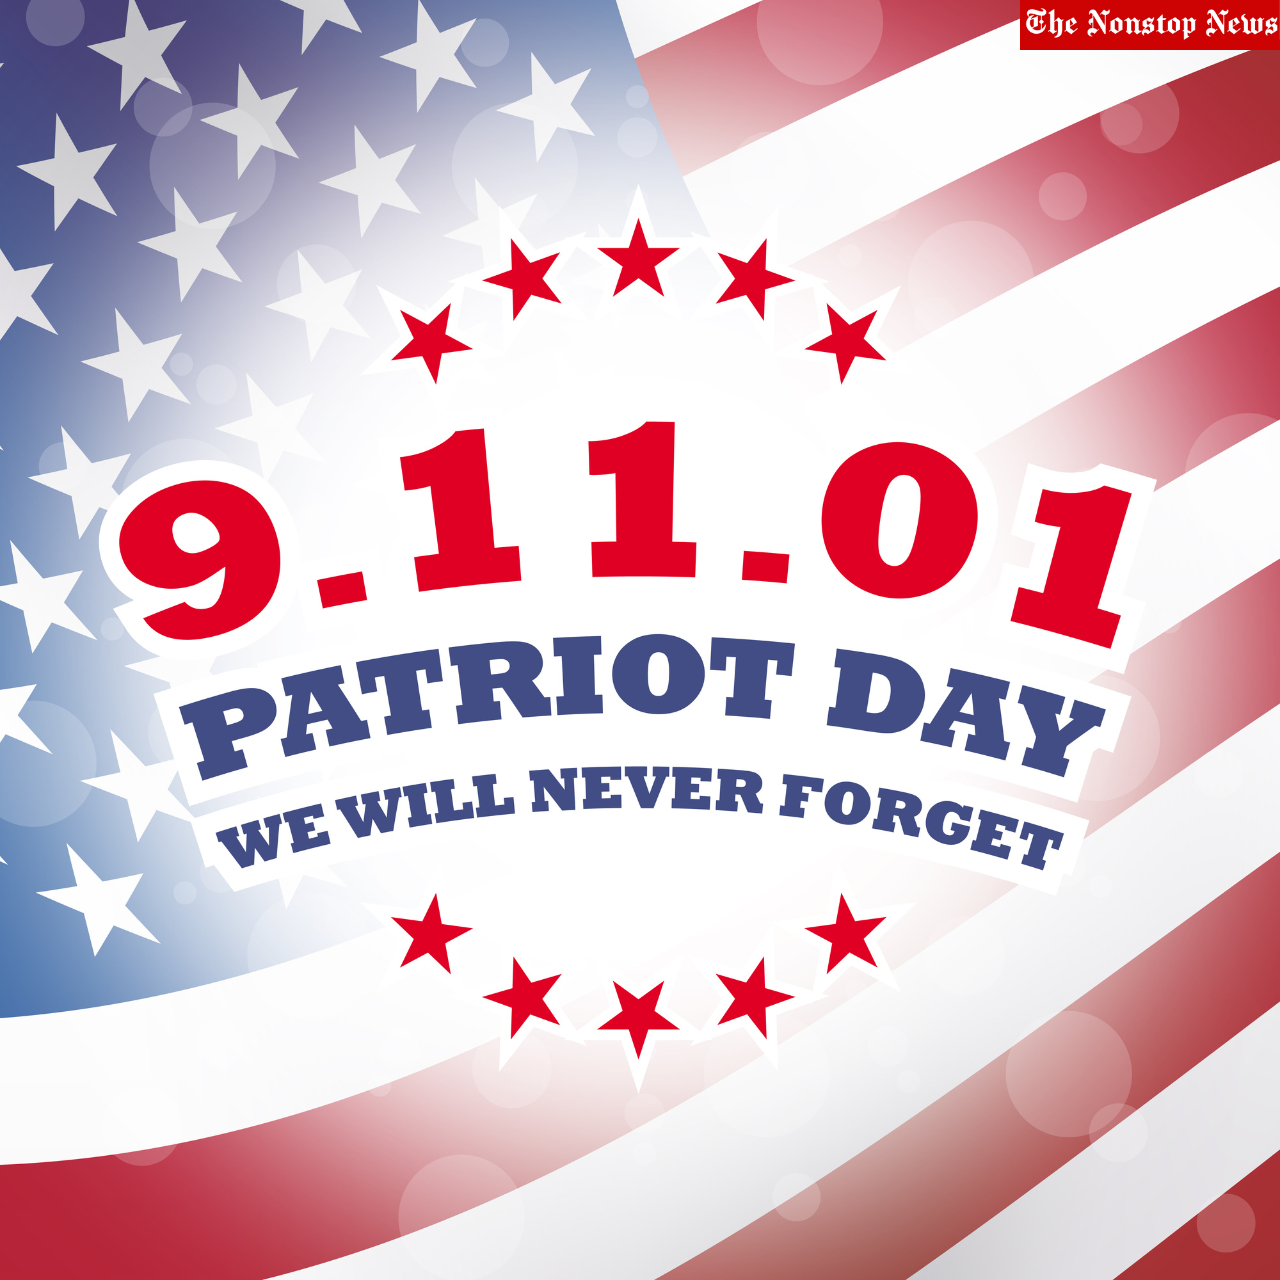 9/11 Remembrance Day 2022 Quotes, Slogans, Messages, Images, And Posters to share